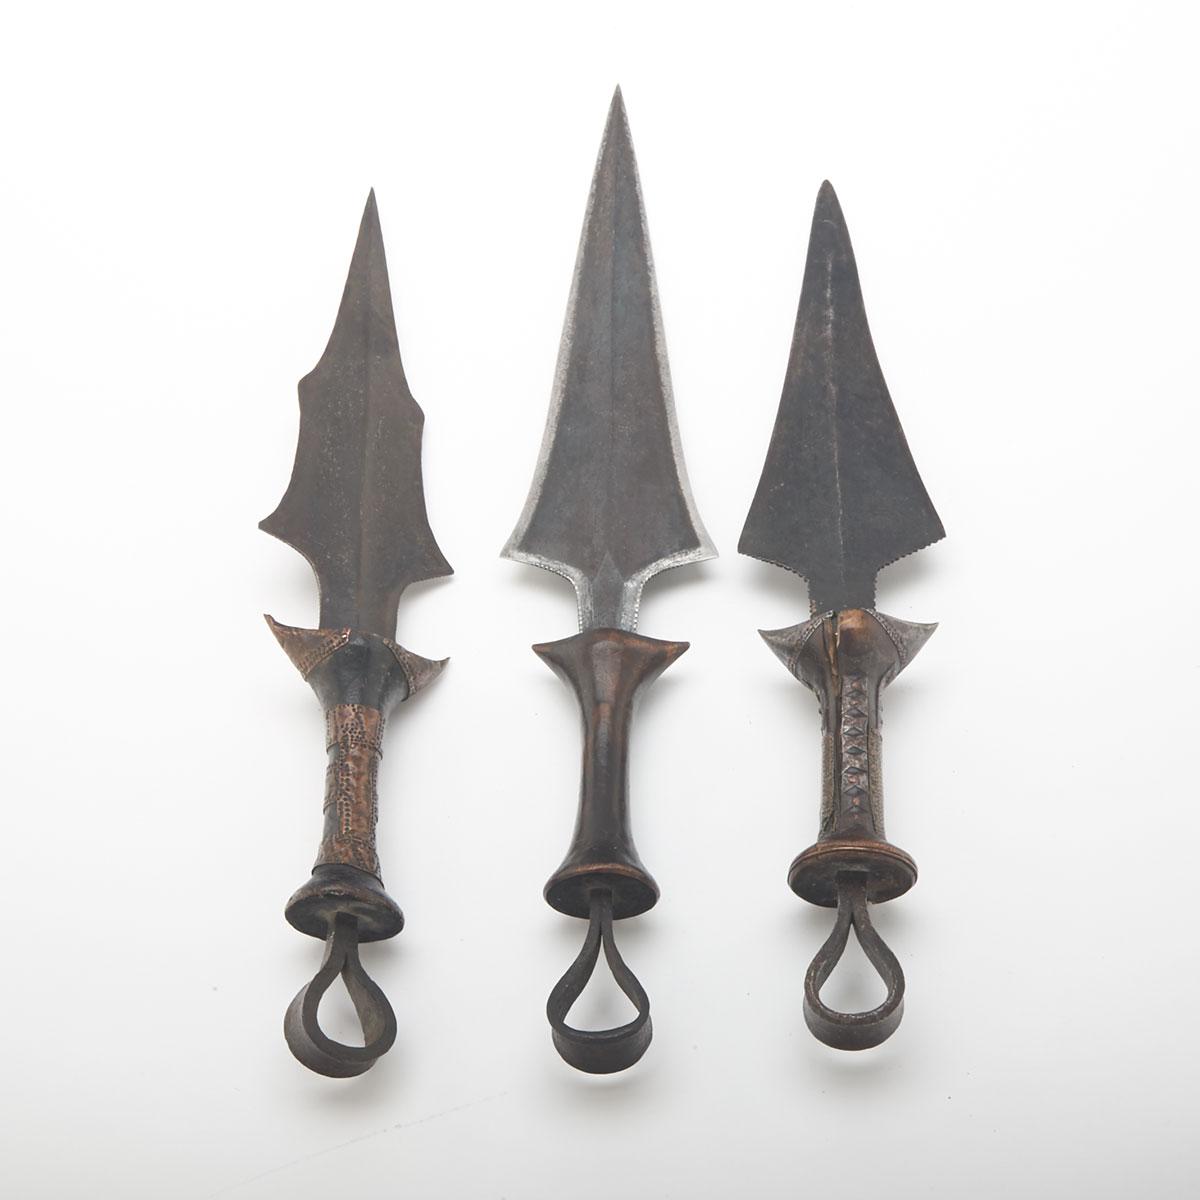 Three African Tetela Daggers, Zaire, 19th/early 20th century